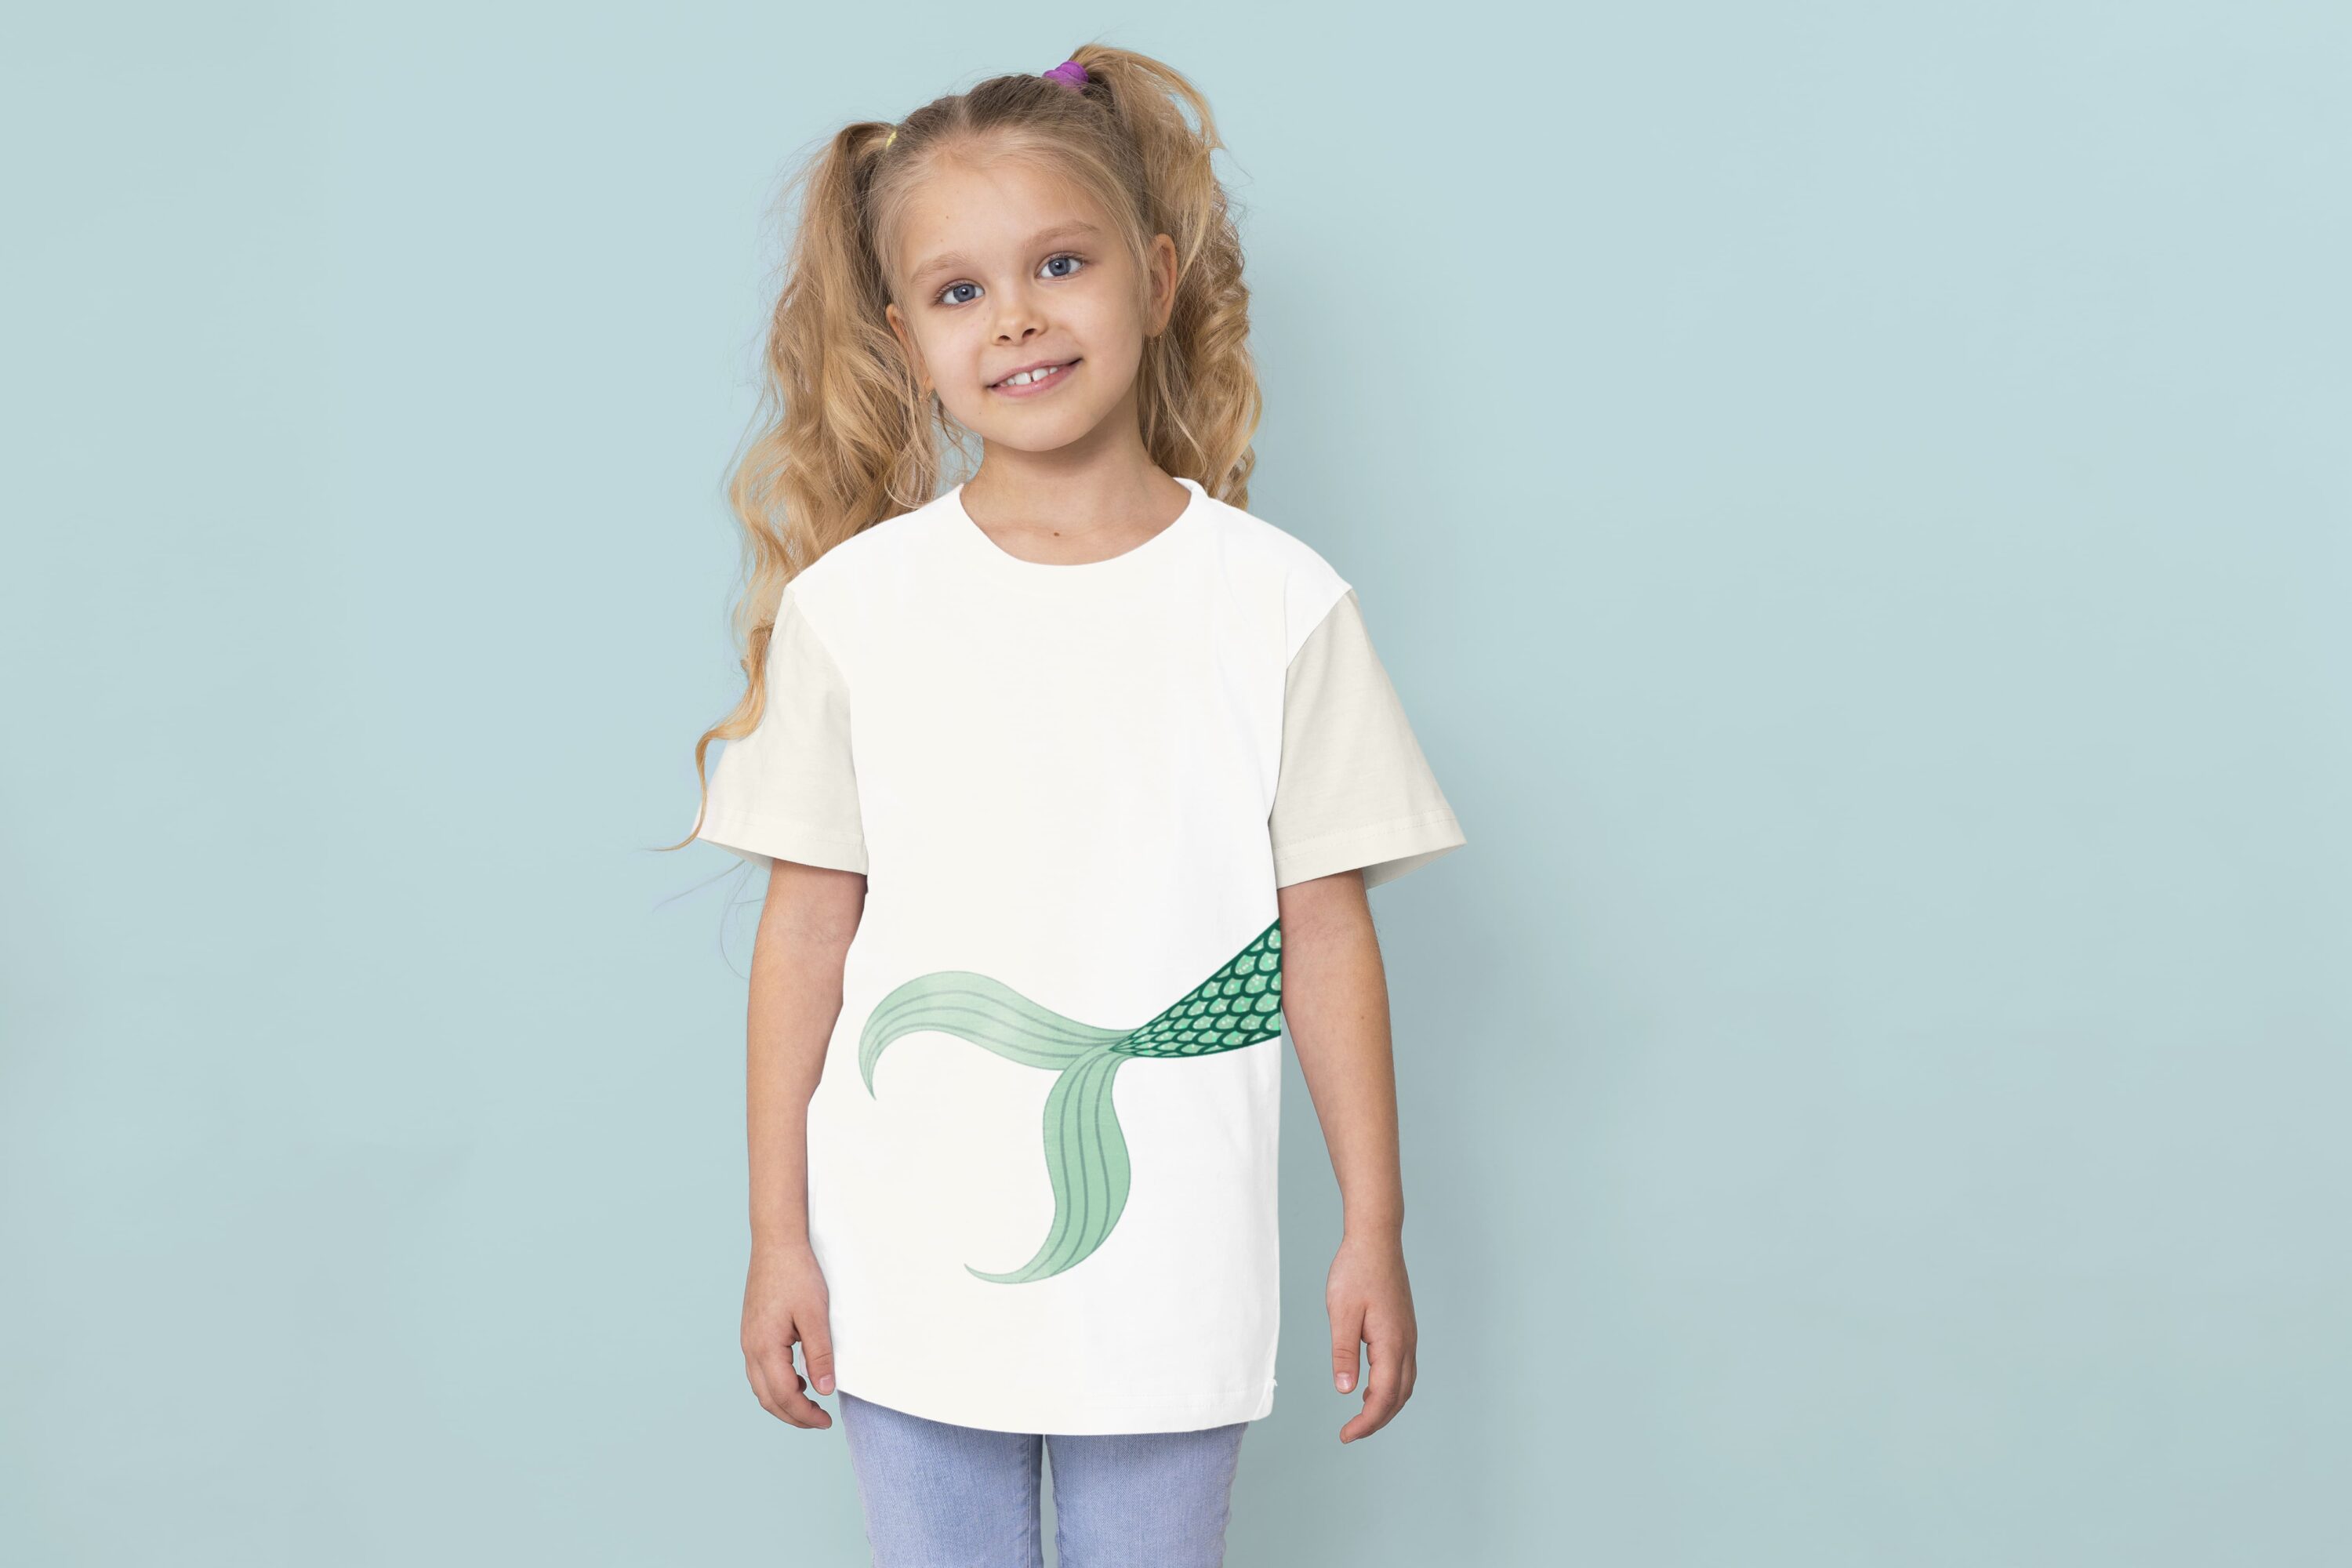 White y-shirt for the girls with the green mermaid tail.